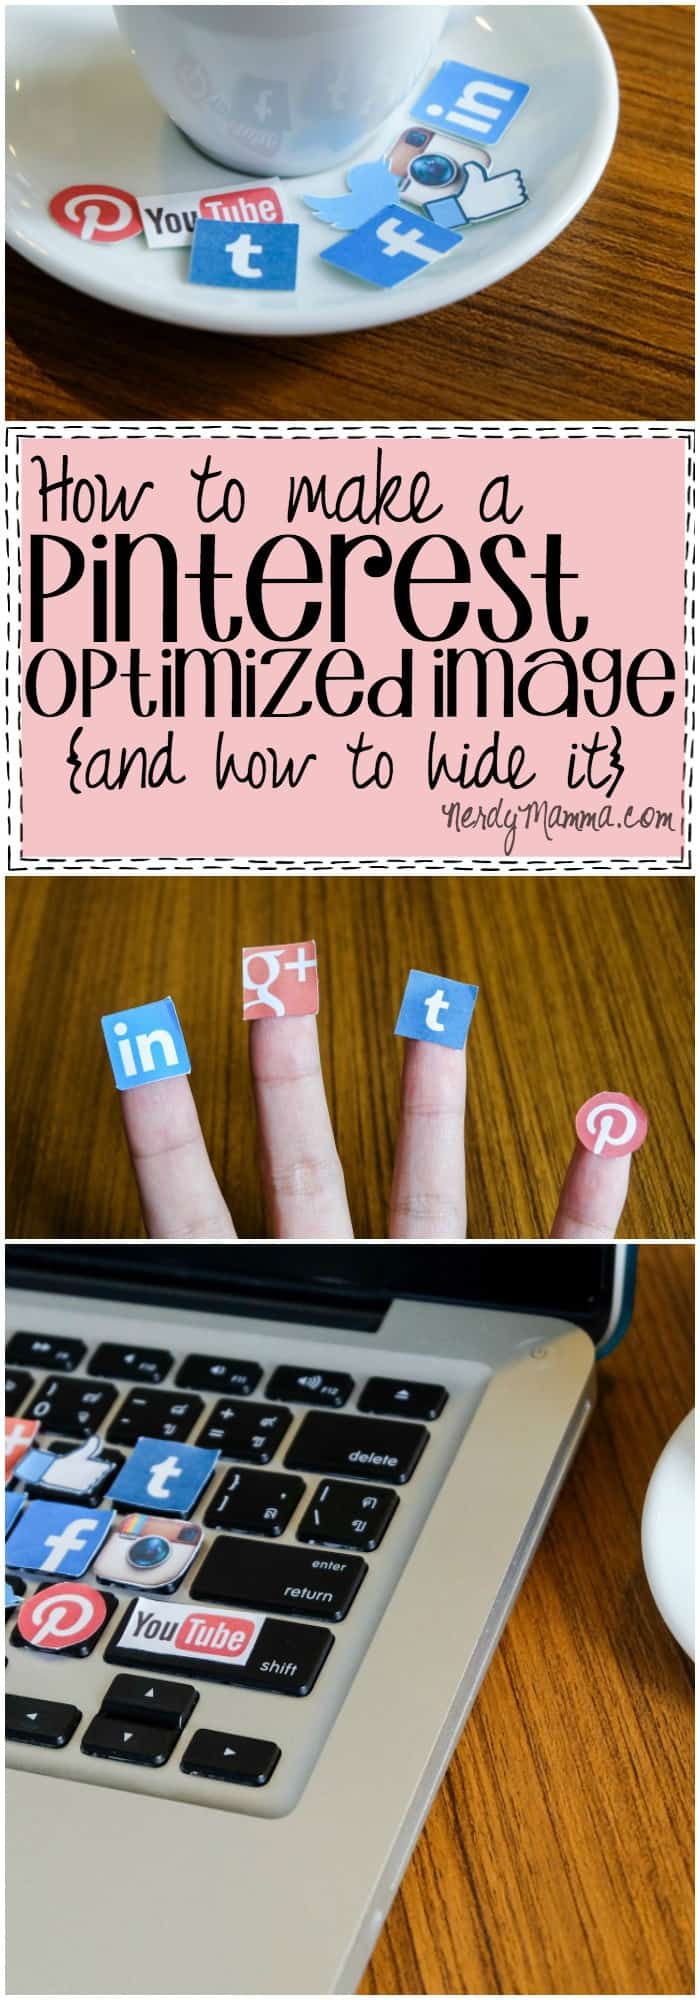 This tutorial for how to make a pinterest optimized image is just everything I needed! And this also tells you how to hide the image in your blog post. Very nice.